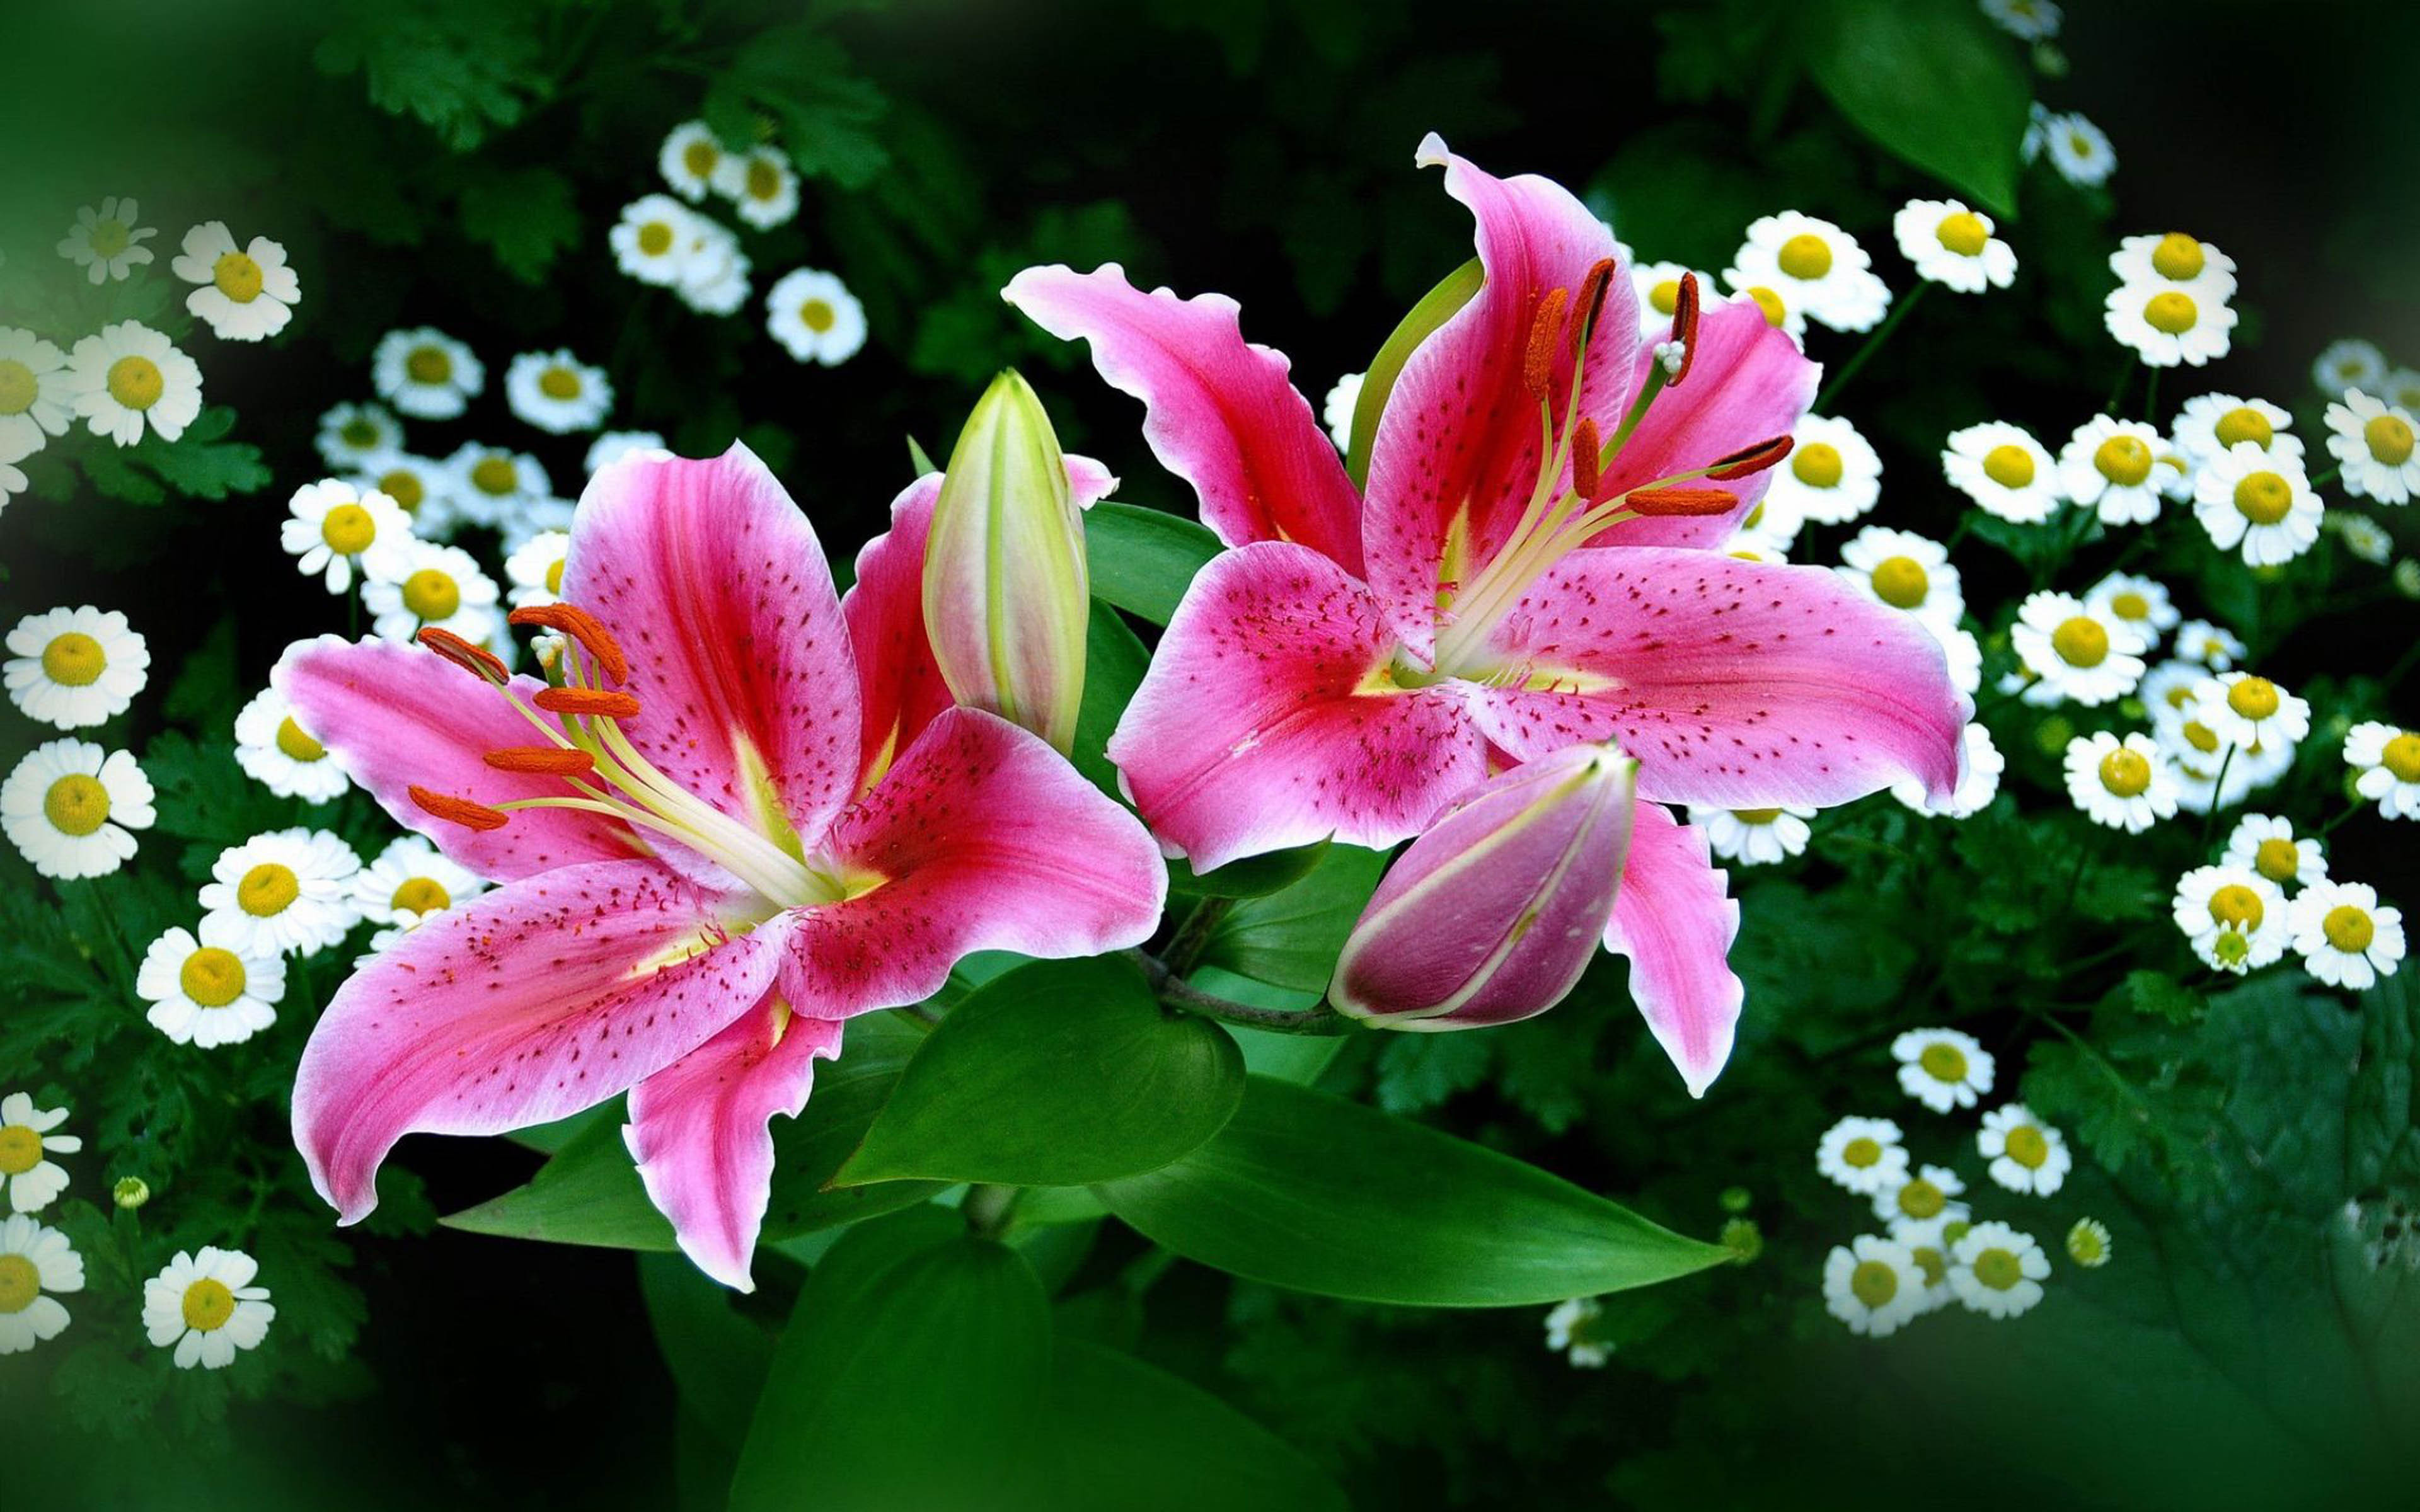 Lilies Tiger Lily Flowers Lily Garden Desktop Wallpapers ...